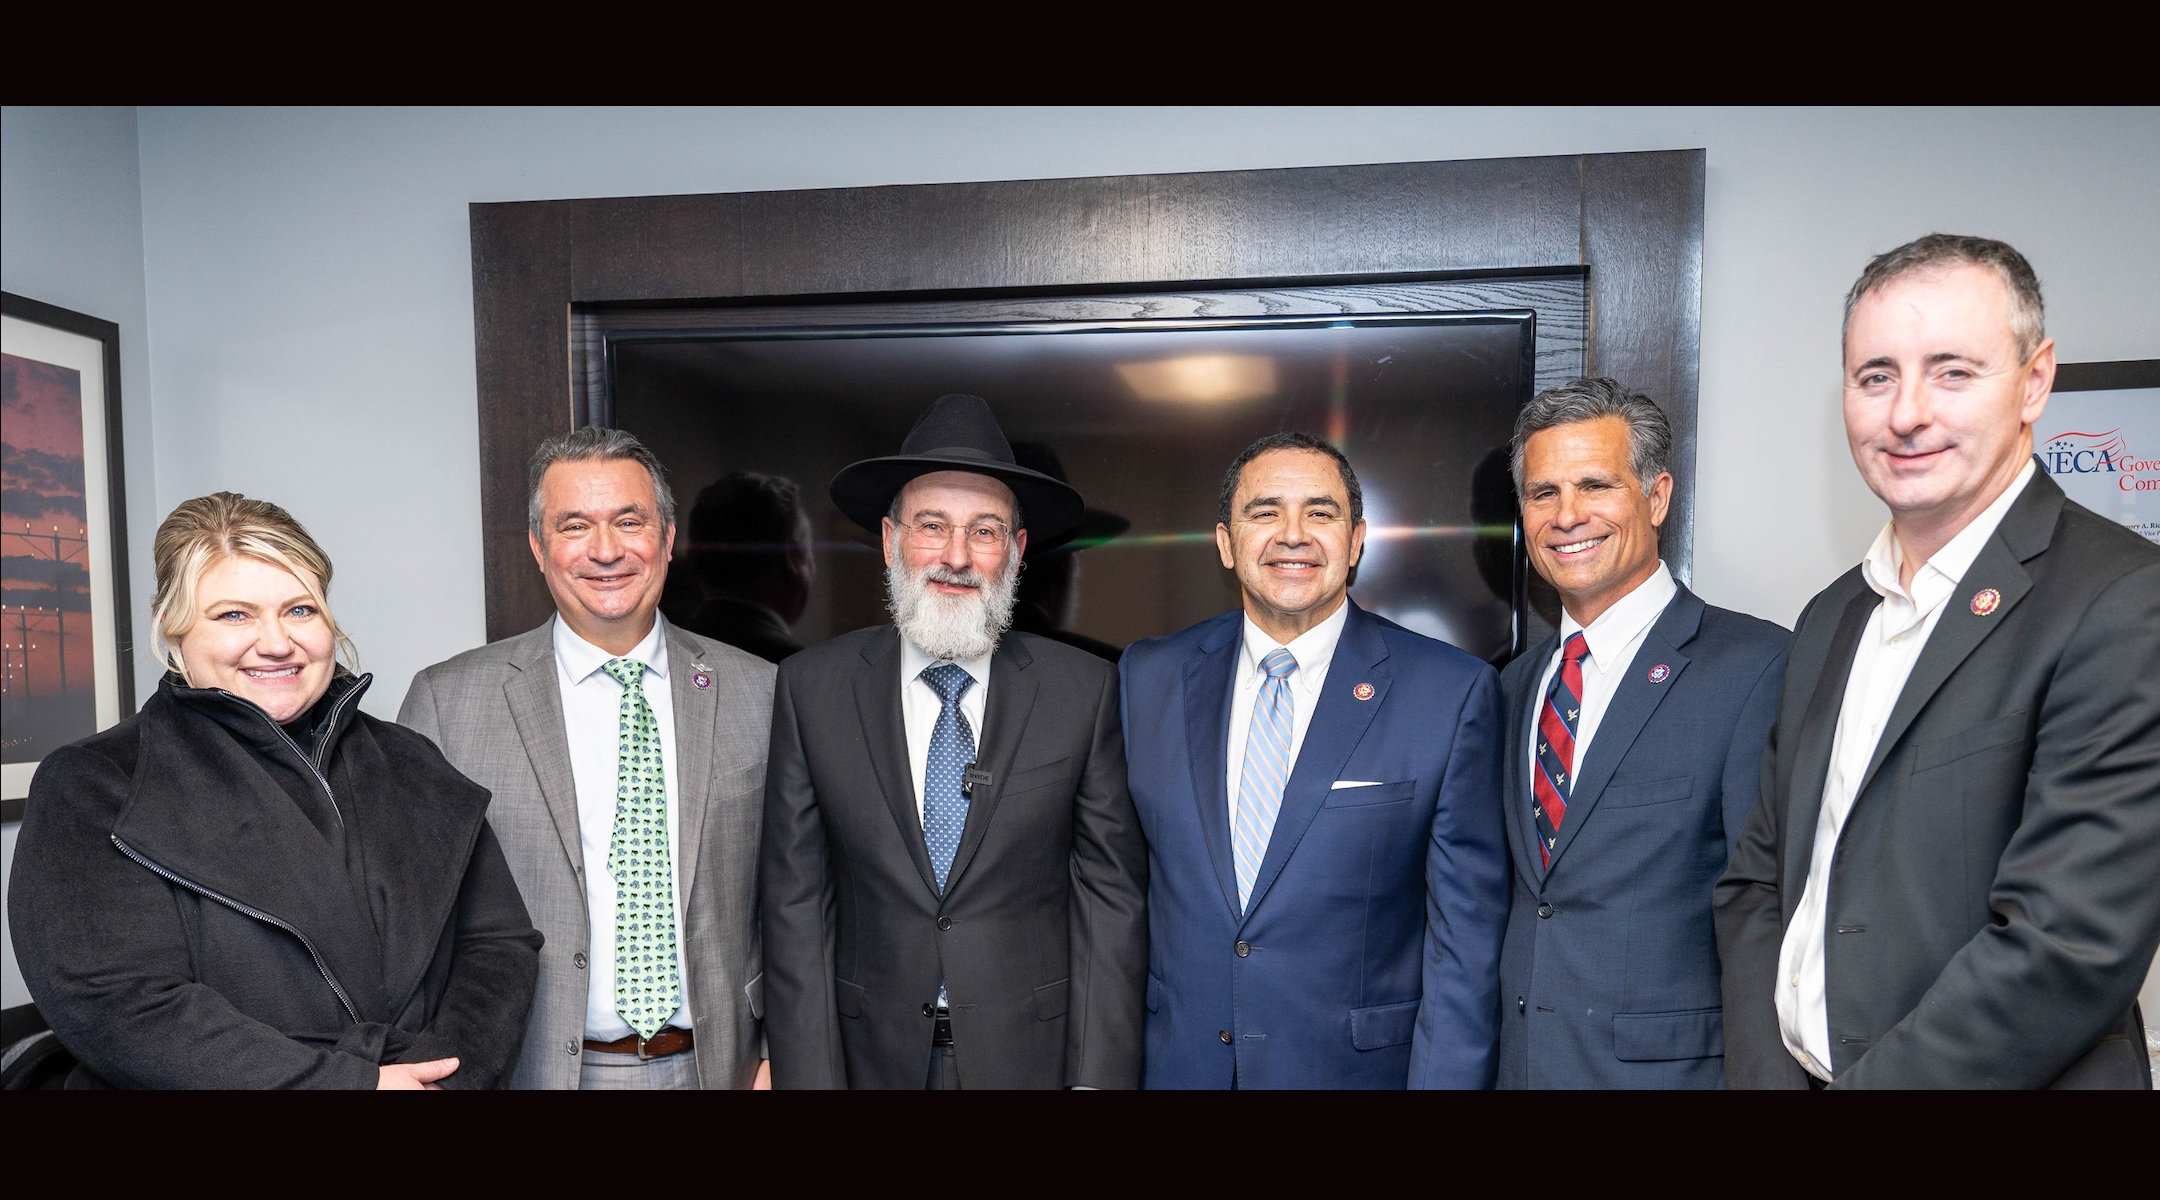 Non-Jewish U.S. reps form Caucus for Advancement of Torah Values with help of Canadian rabbi